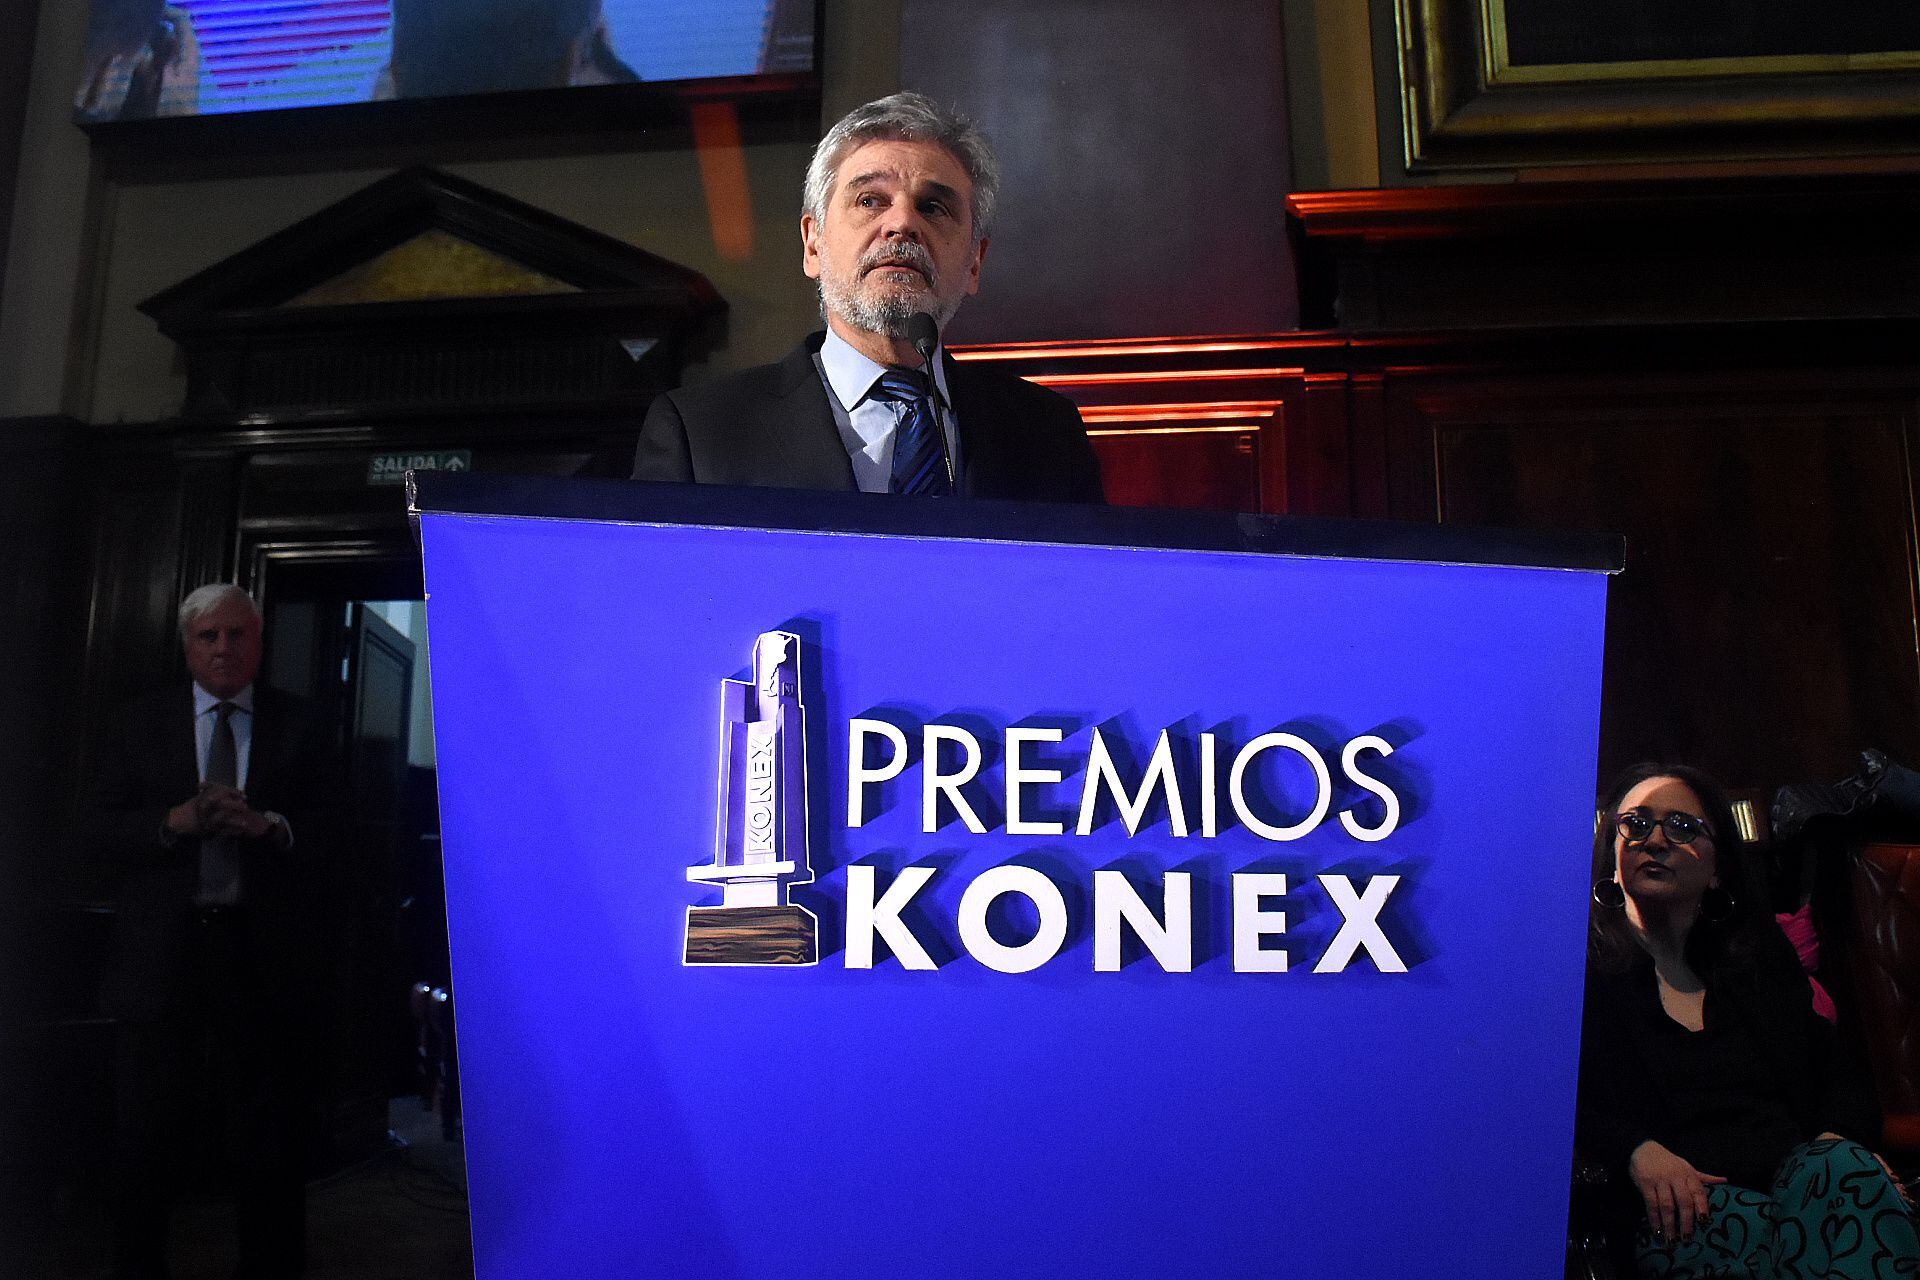 Konex science and technology diplomas delivered 2023